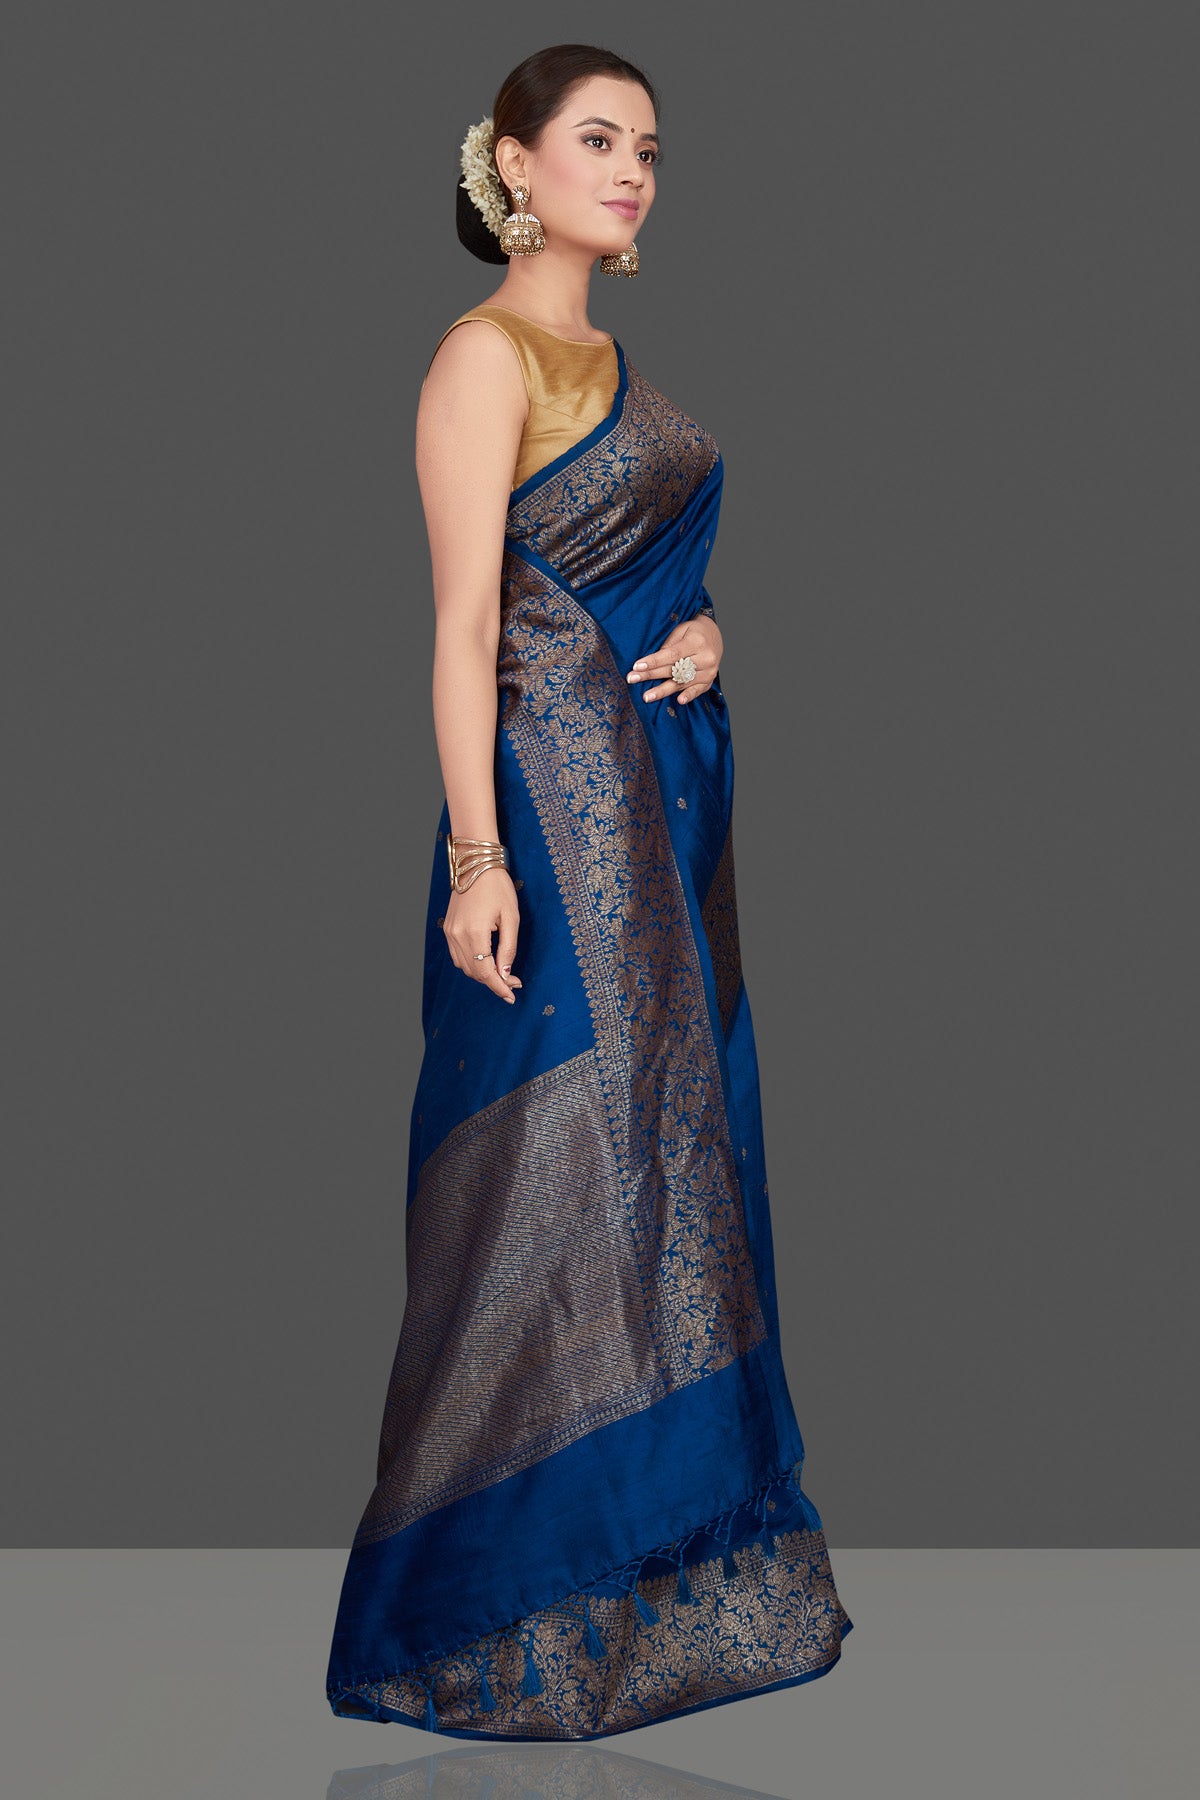 Buy stunning dark blue tussar Banarasi saree online in USA with antique zari buta border. Go for stunning Indian designer sarees, georgette sarees, handwoven saris, embroidered sarees for festive occasions and weddings from Pure Elegance Indian clothing store in USA.-side